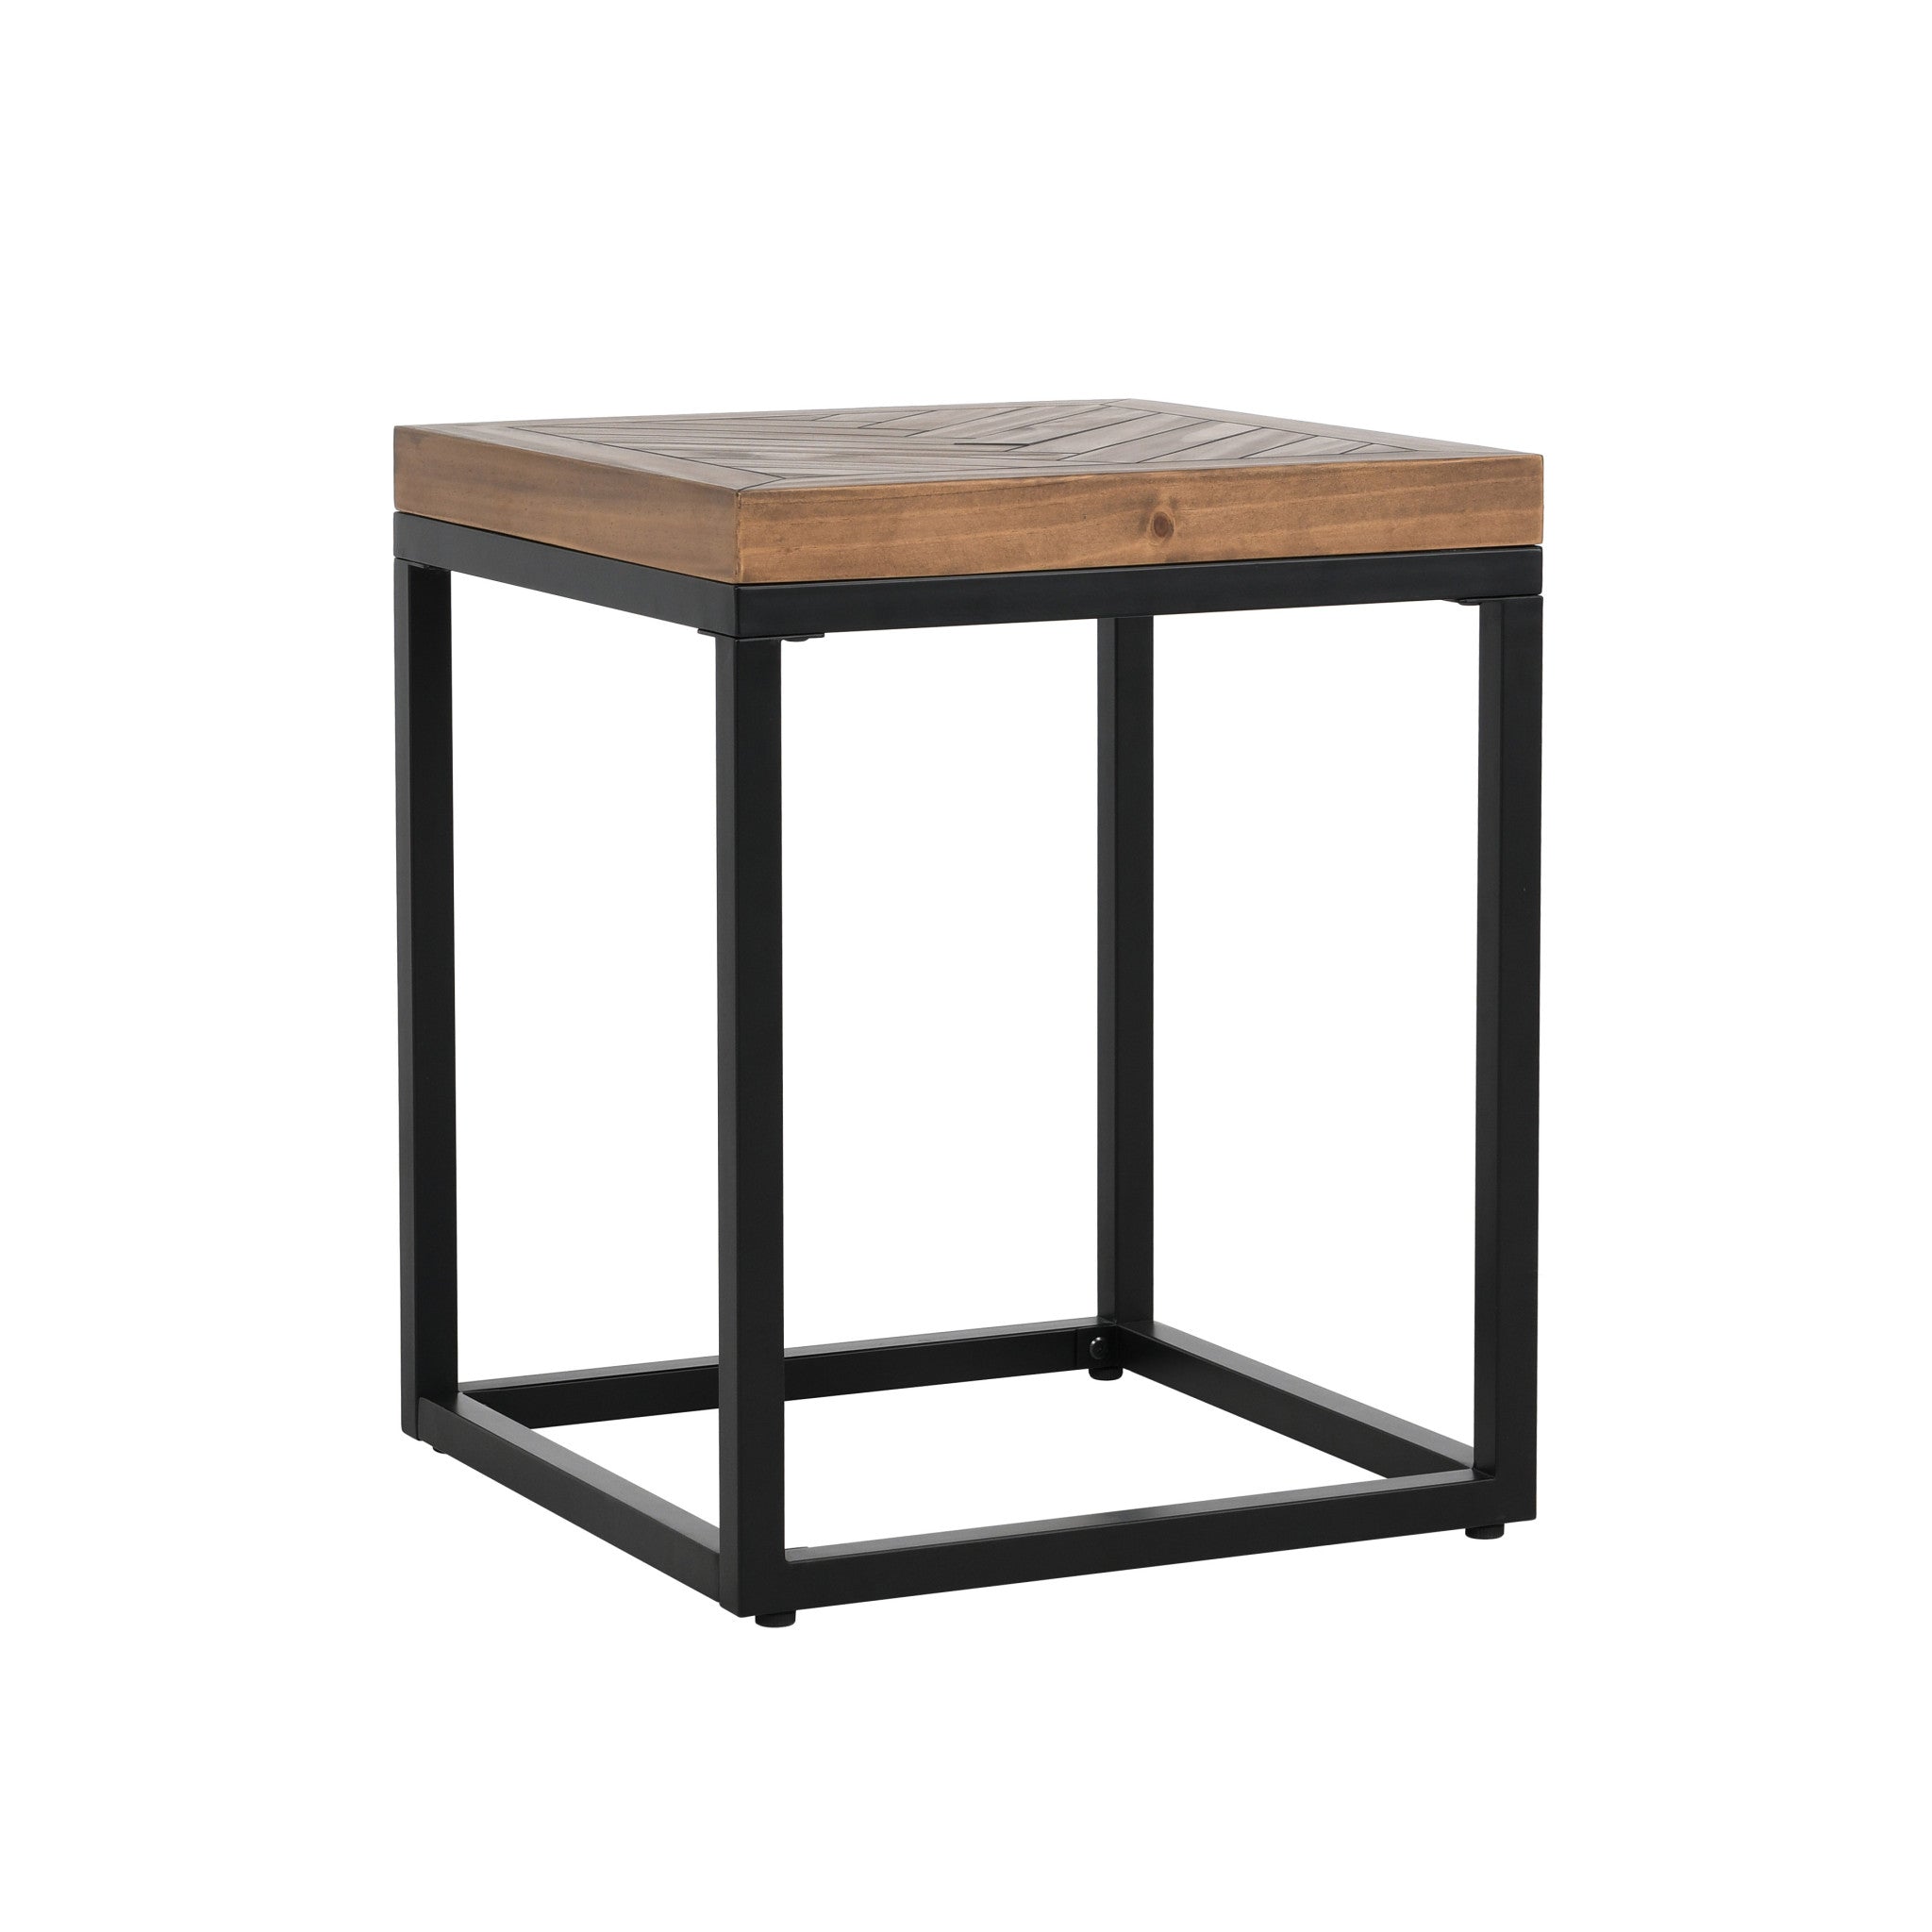 22" Black And Brown Solid Wood End Table